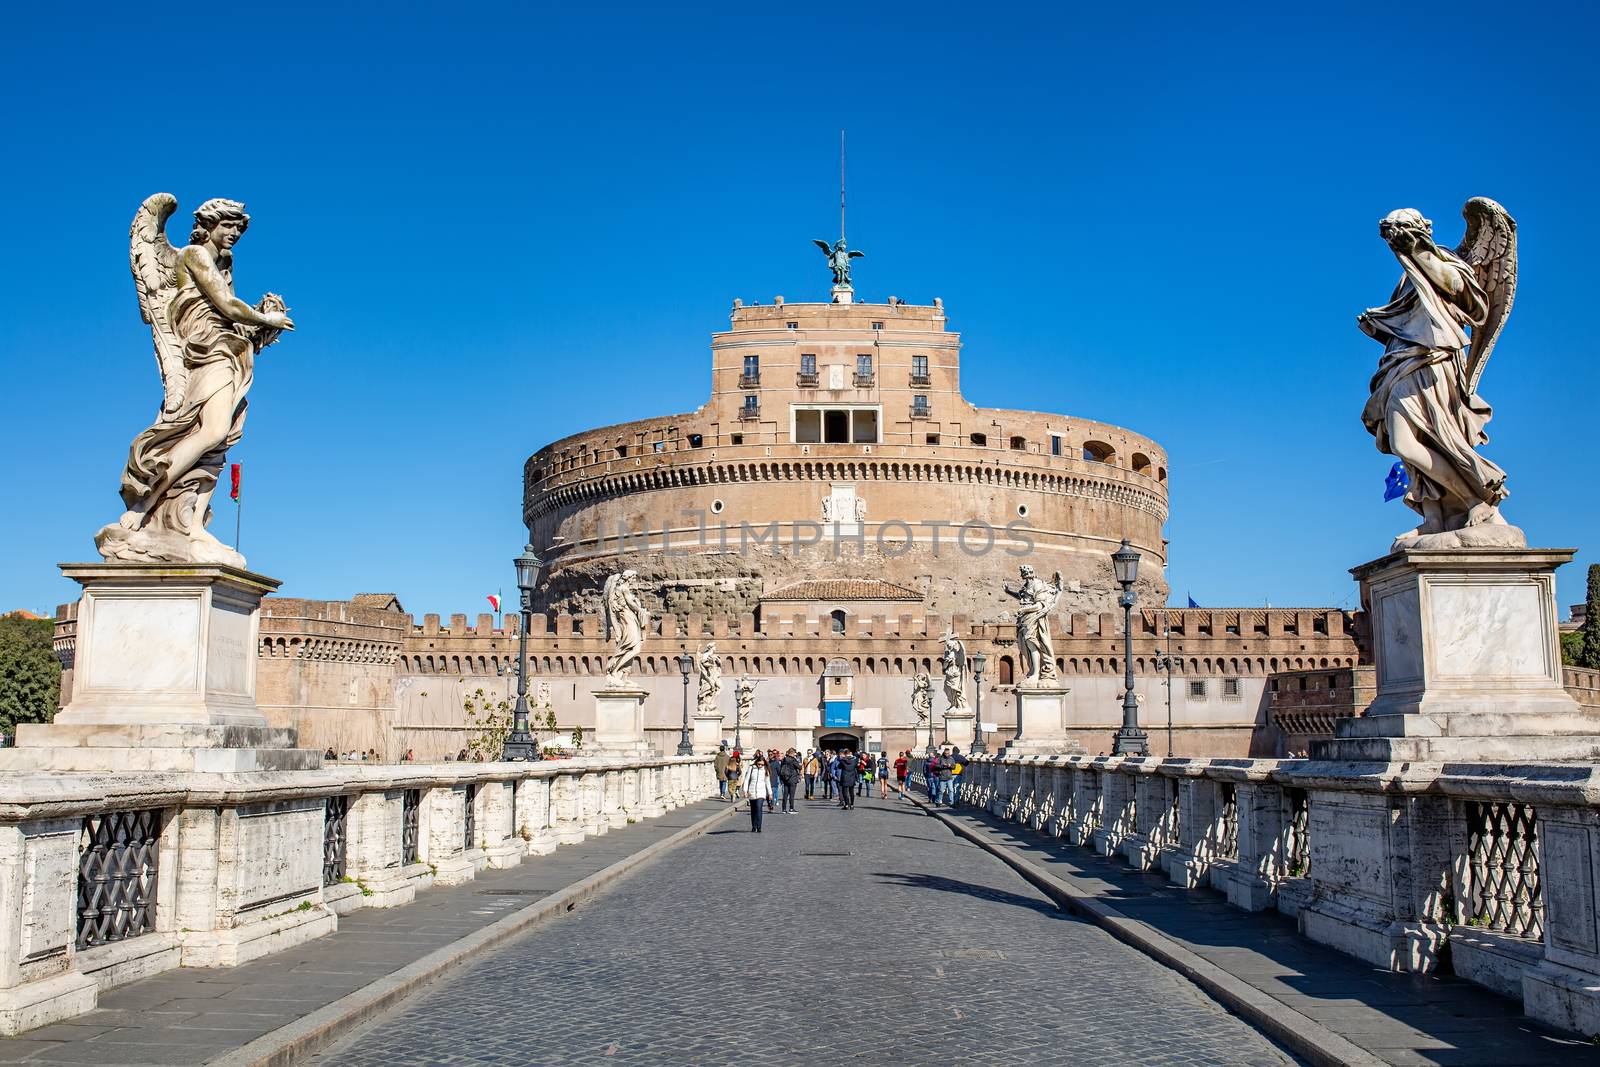 Frontal view of the Castel Sant'Angelo in Rome, Italy by 977_ReX_977